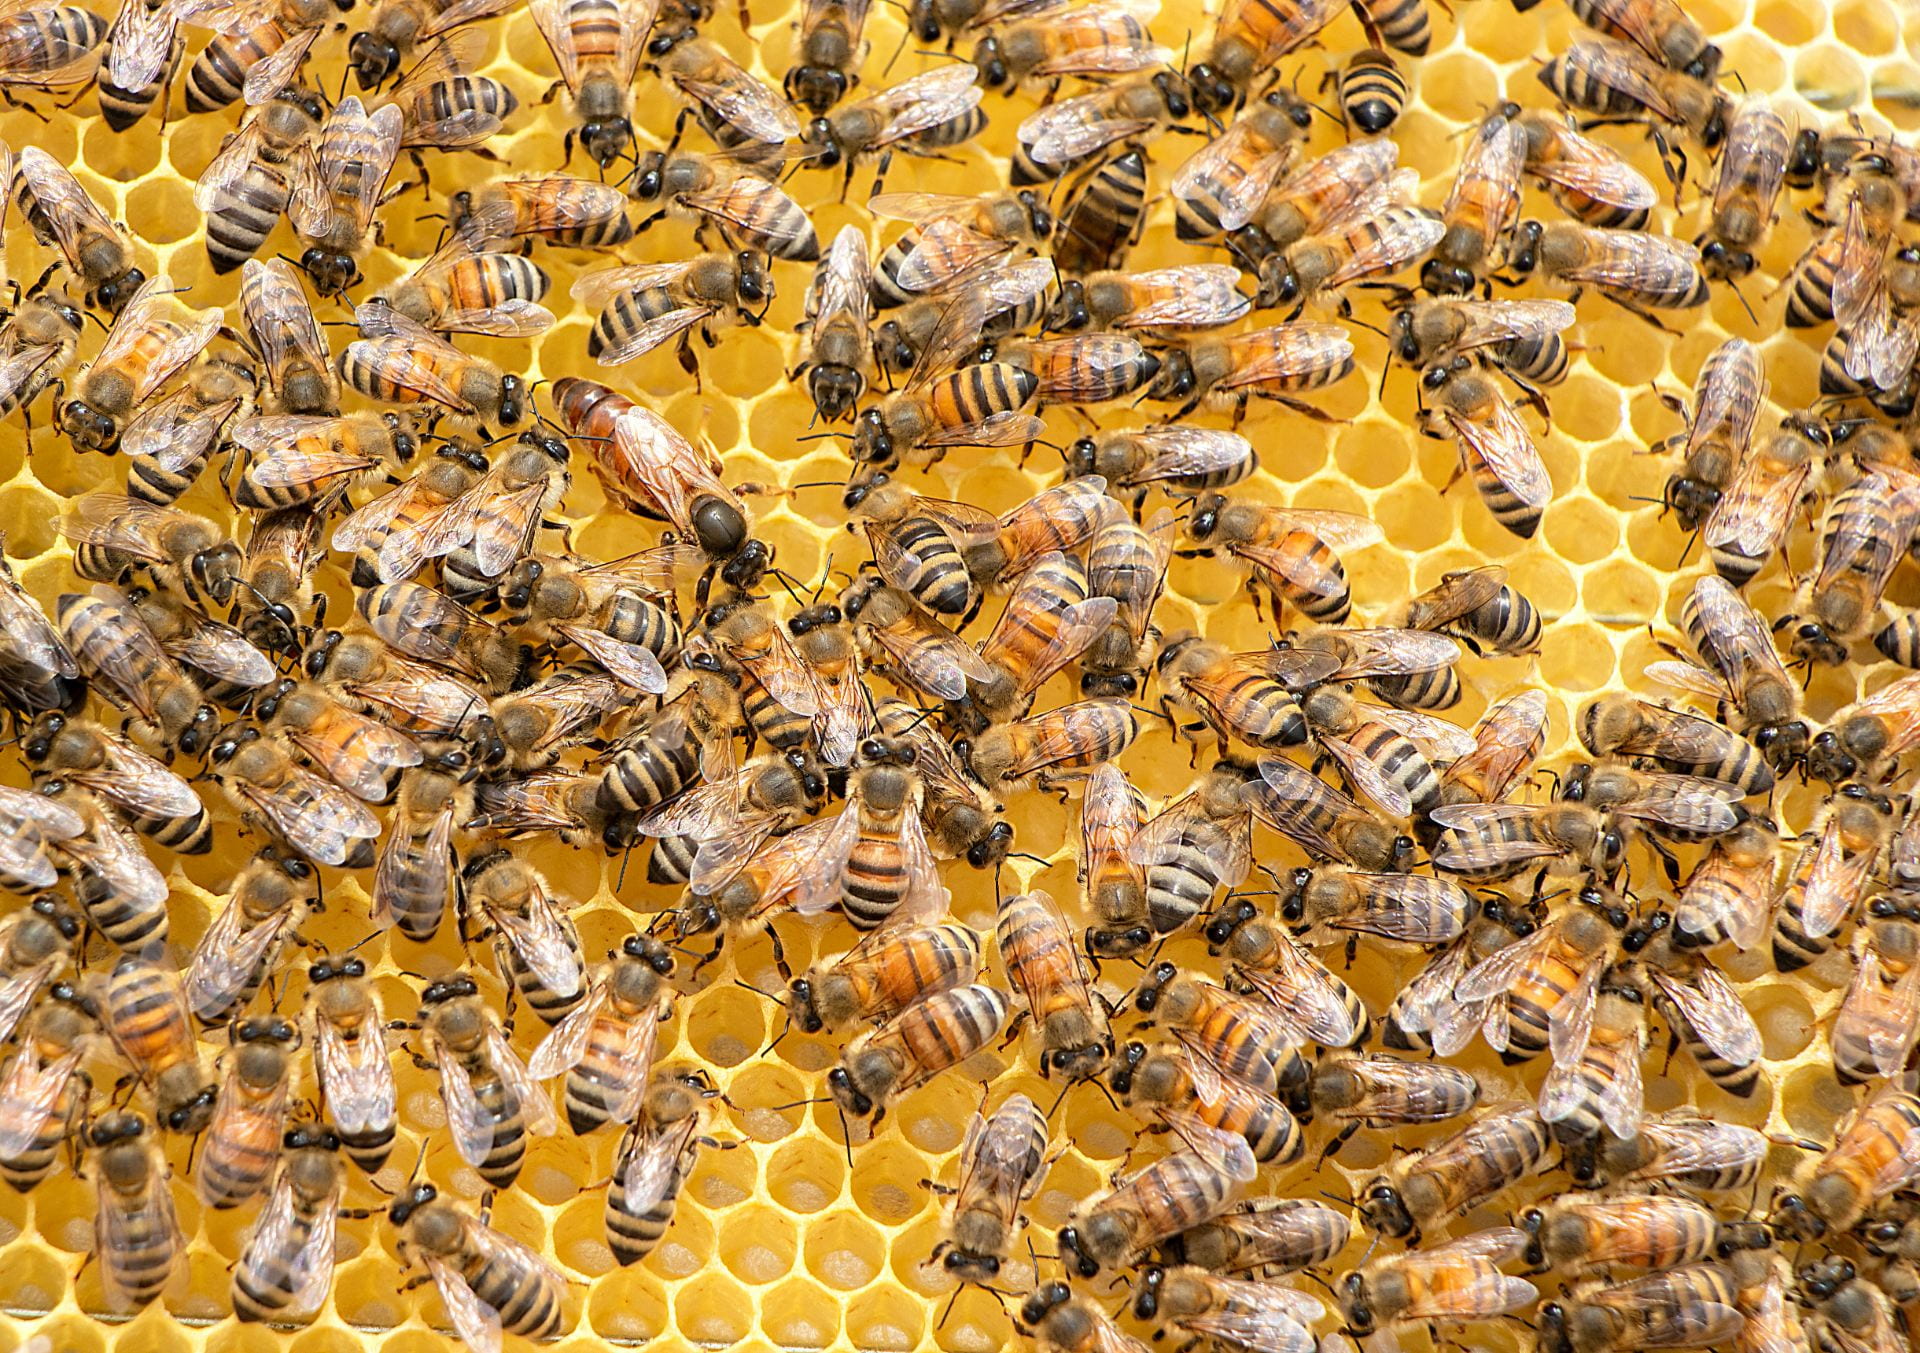 a photograph of a swarm of bees sitting on golden honeycomb. There are many bustling workers surrounding a significantly larger queen bee.